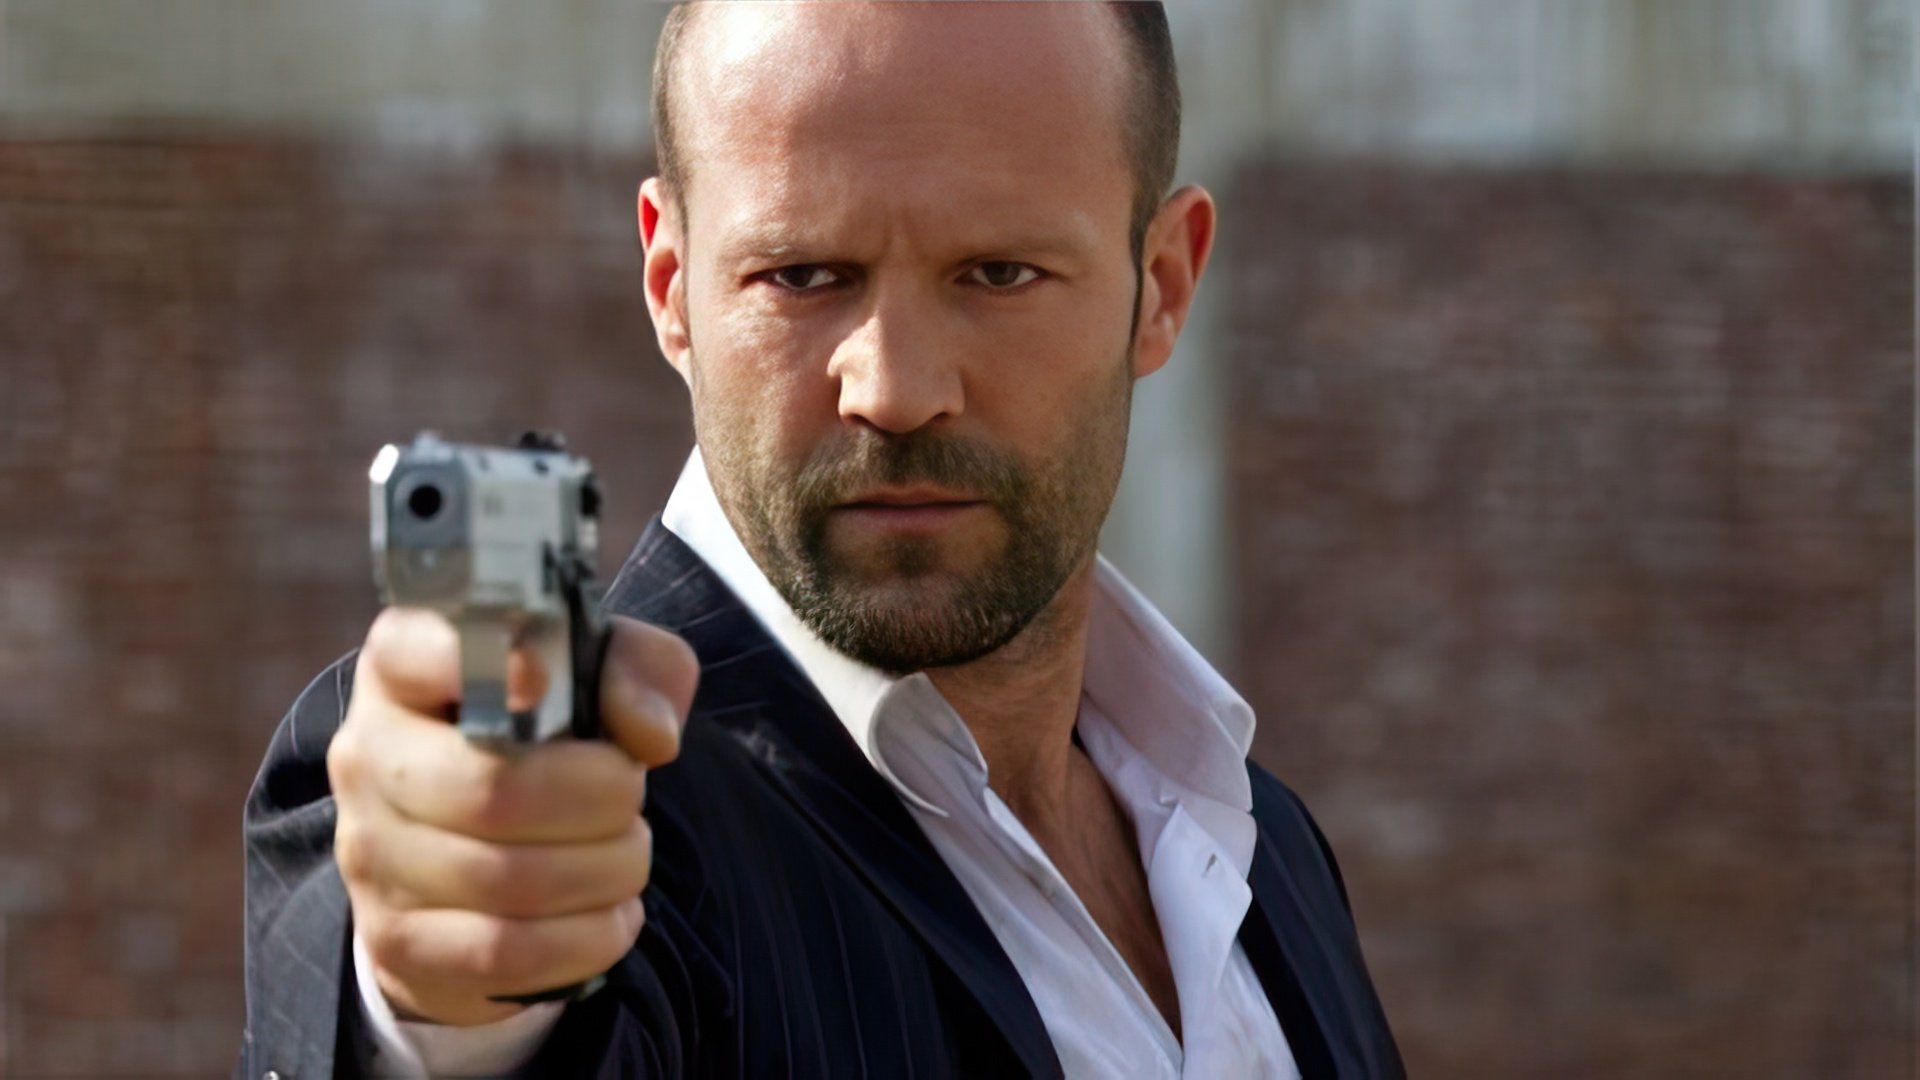 Jason Statham, the star of thrillers and militants